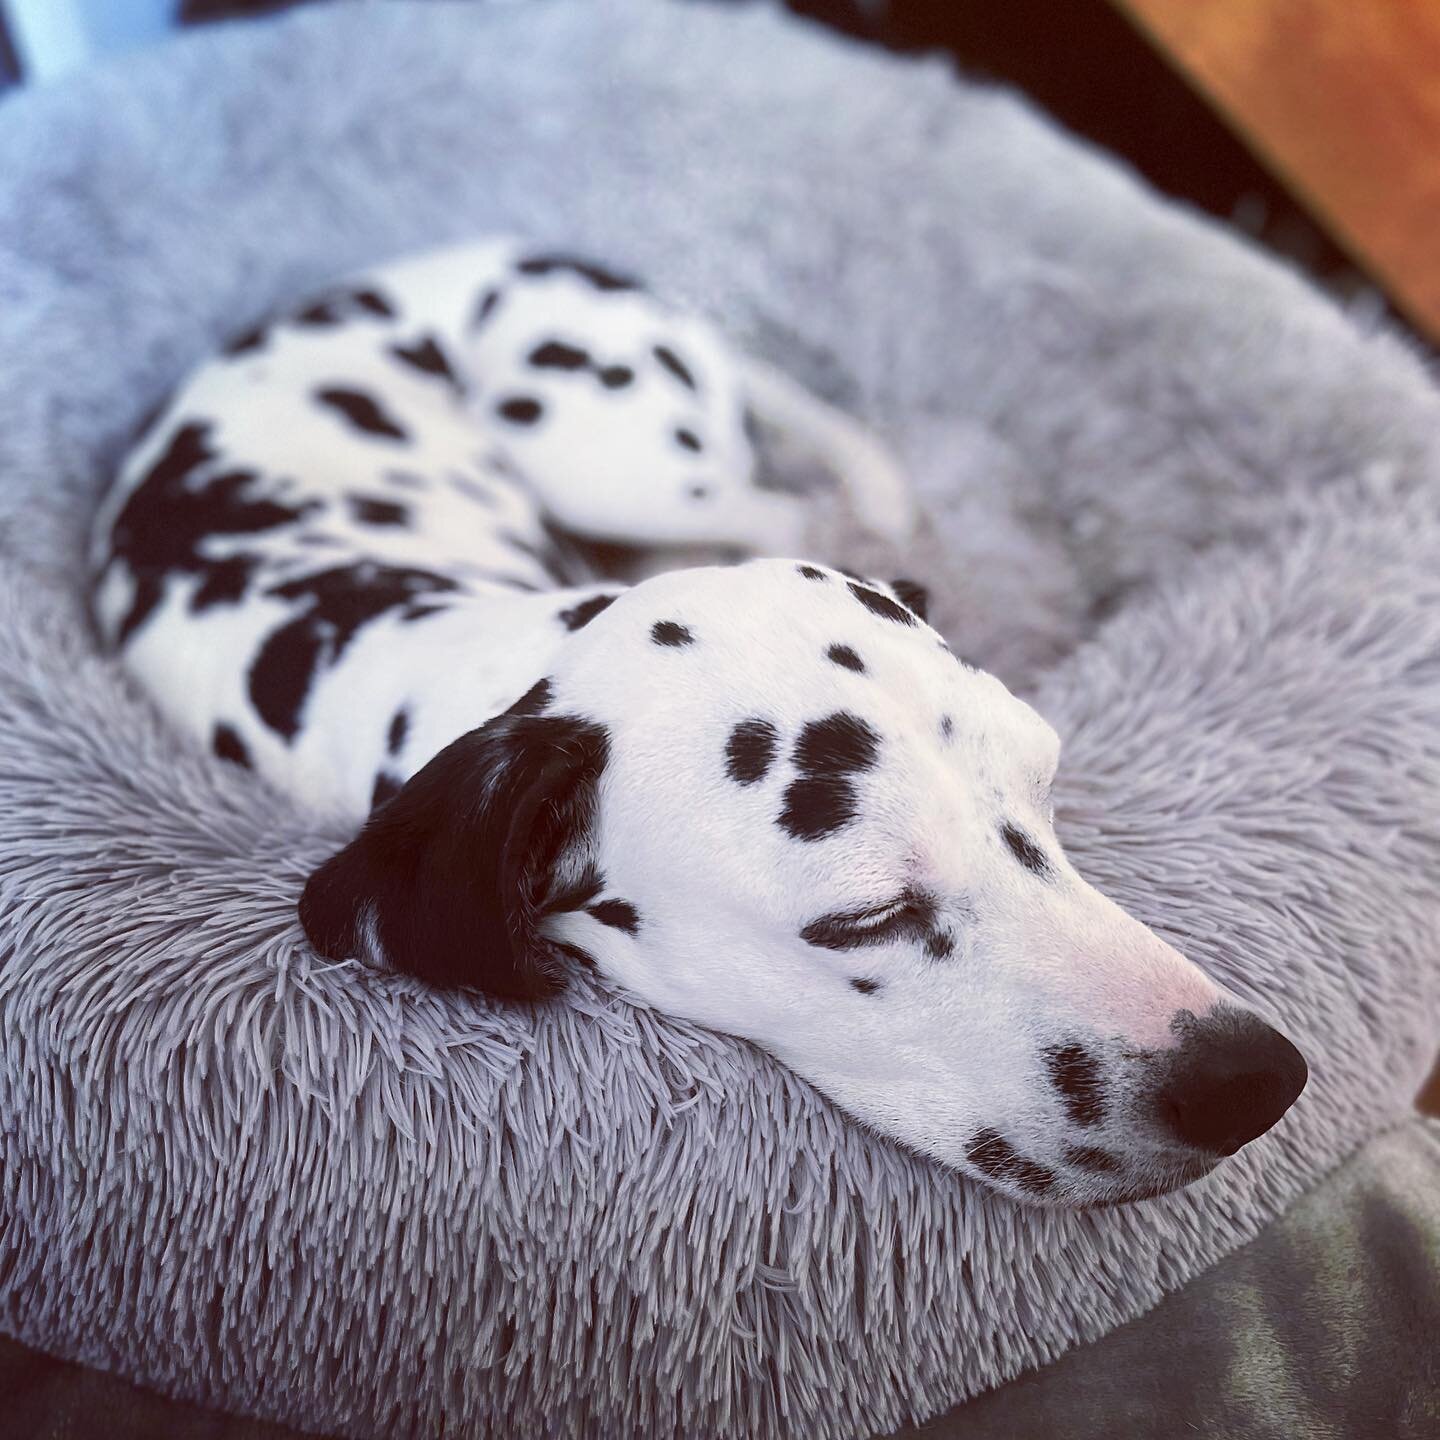 Apparently it&rsquo;s #bringyourdogtoworkday so as we mostly work from home on Fridays this is a pic of @luluthedally chilling next to our CEO Helen 👌🏼🥰
.
Happy Weekend Peeps :).
#cute #dalmatian #sleepypup